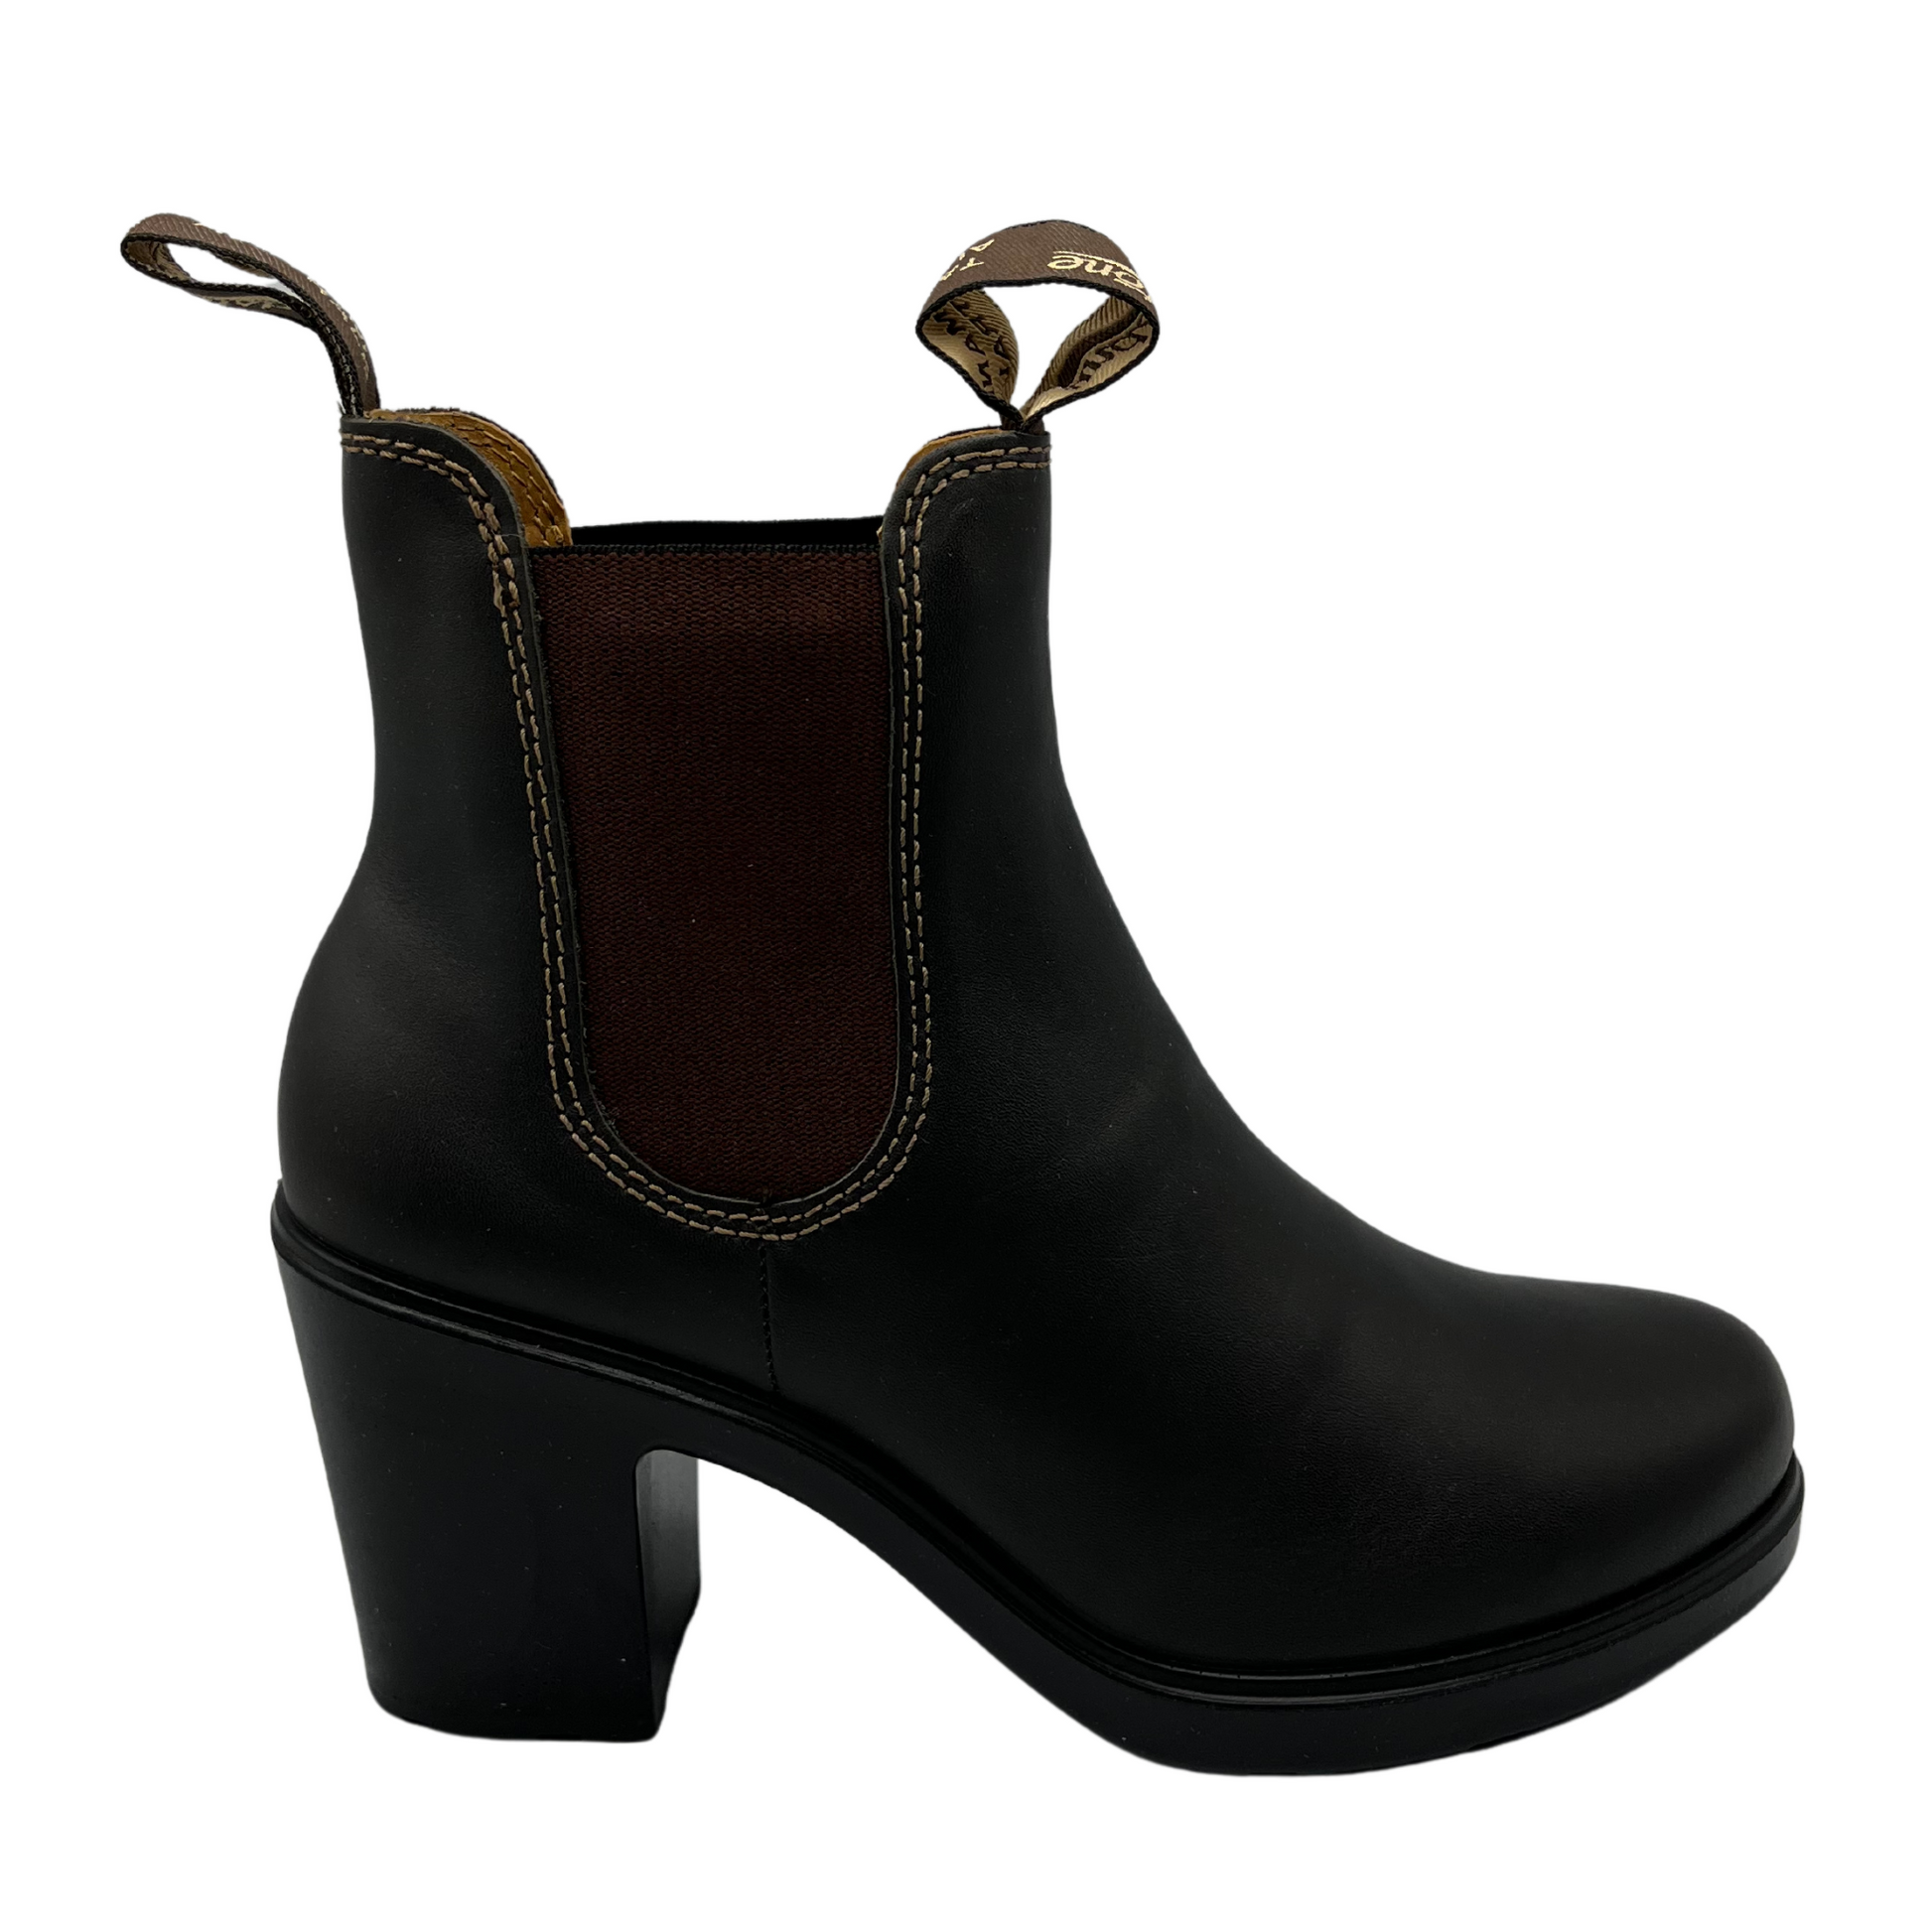 Right facing view of stout brown leather chelsea boot with 3 inch heel and elastic side gore